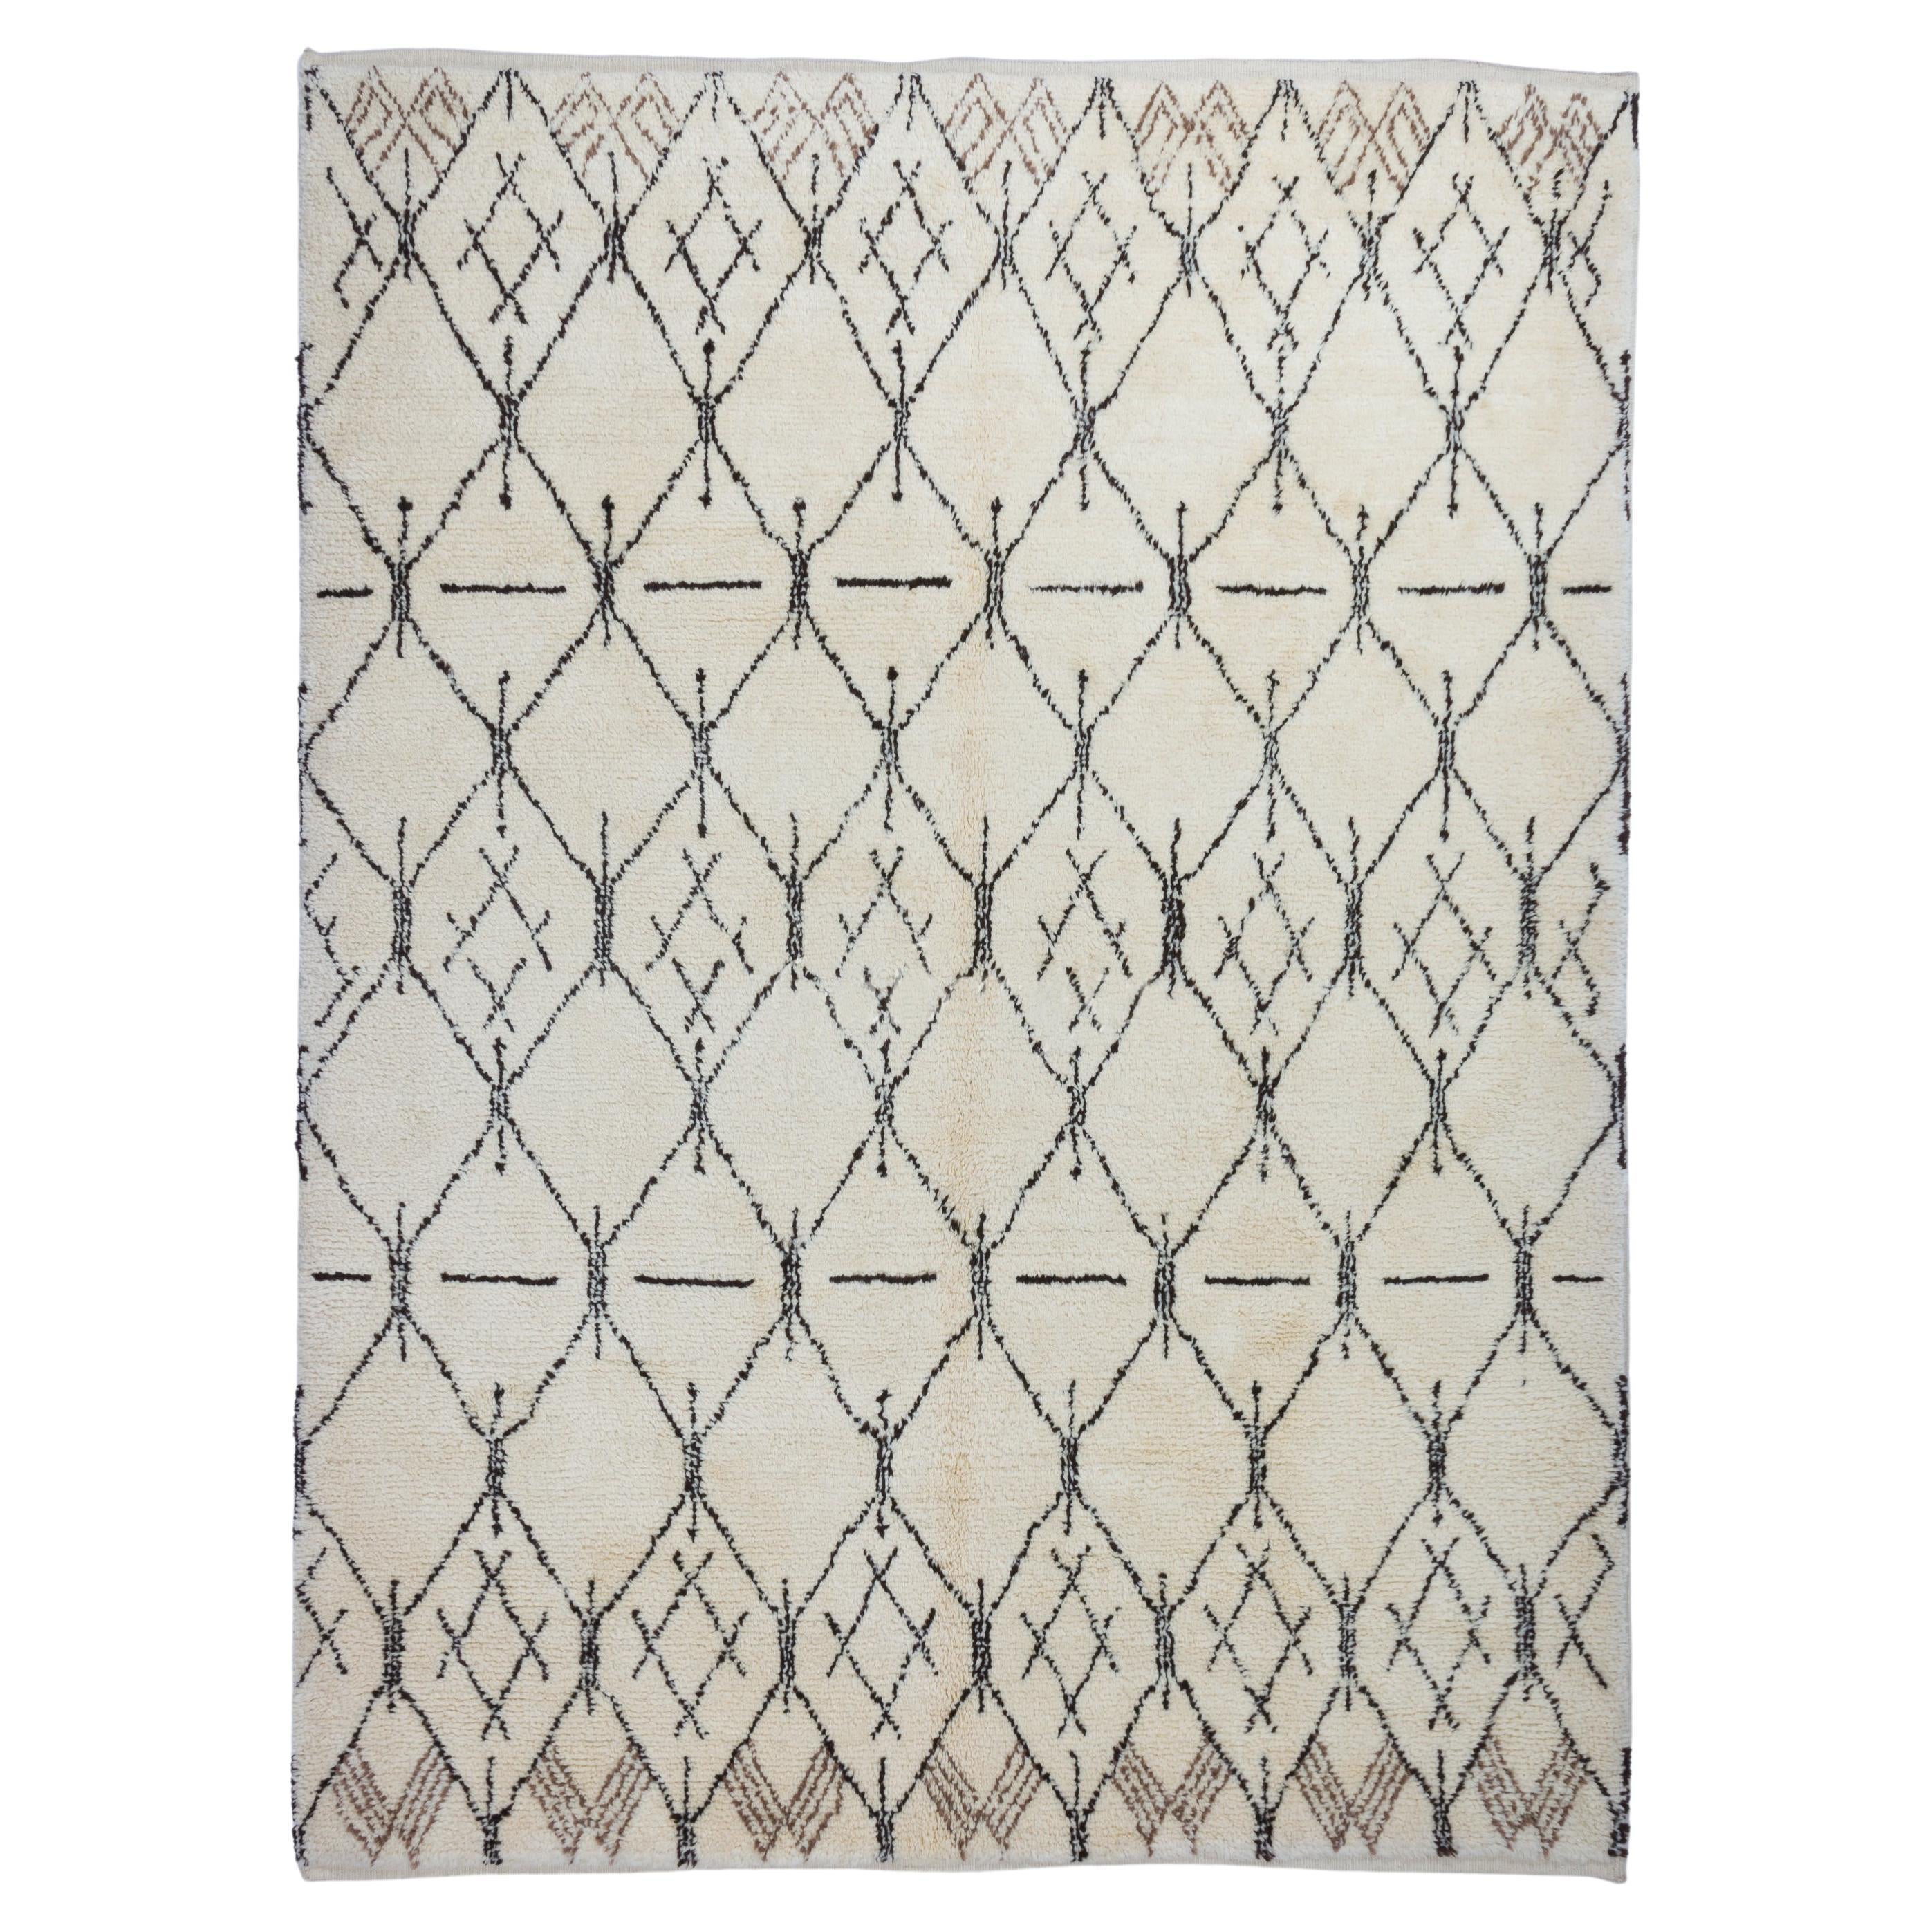 Contemporary Handmade Moroccan Rug. 100% Natural Wool. Custom Options Available